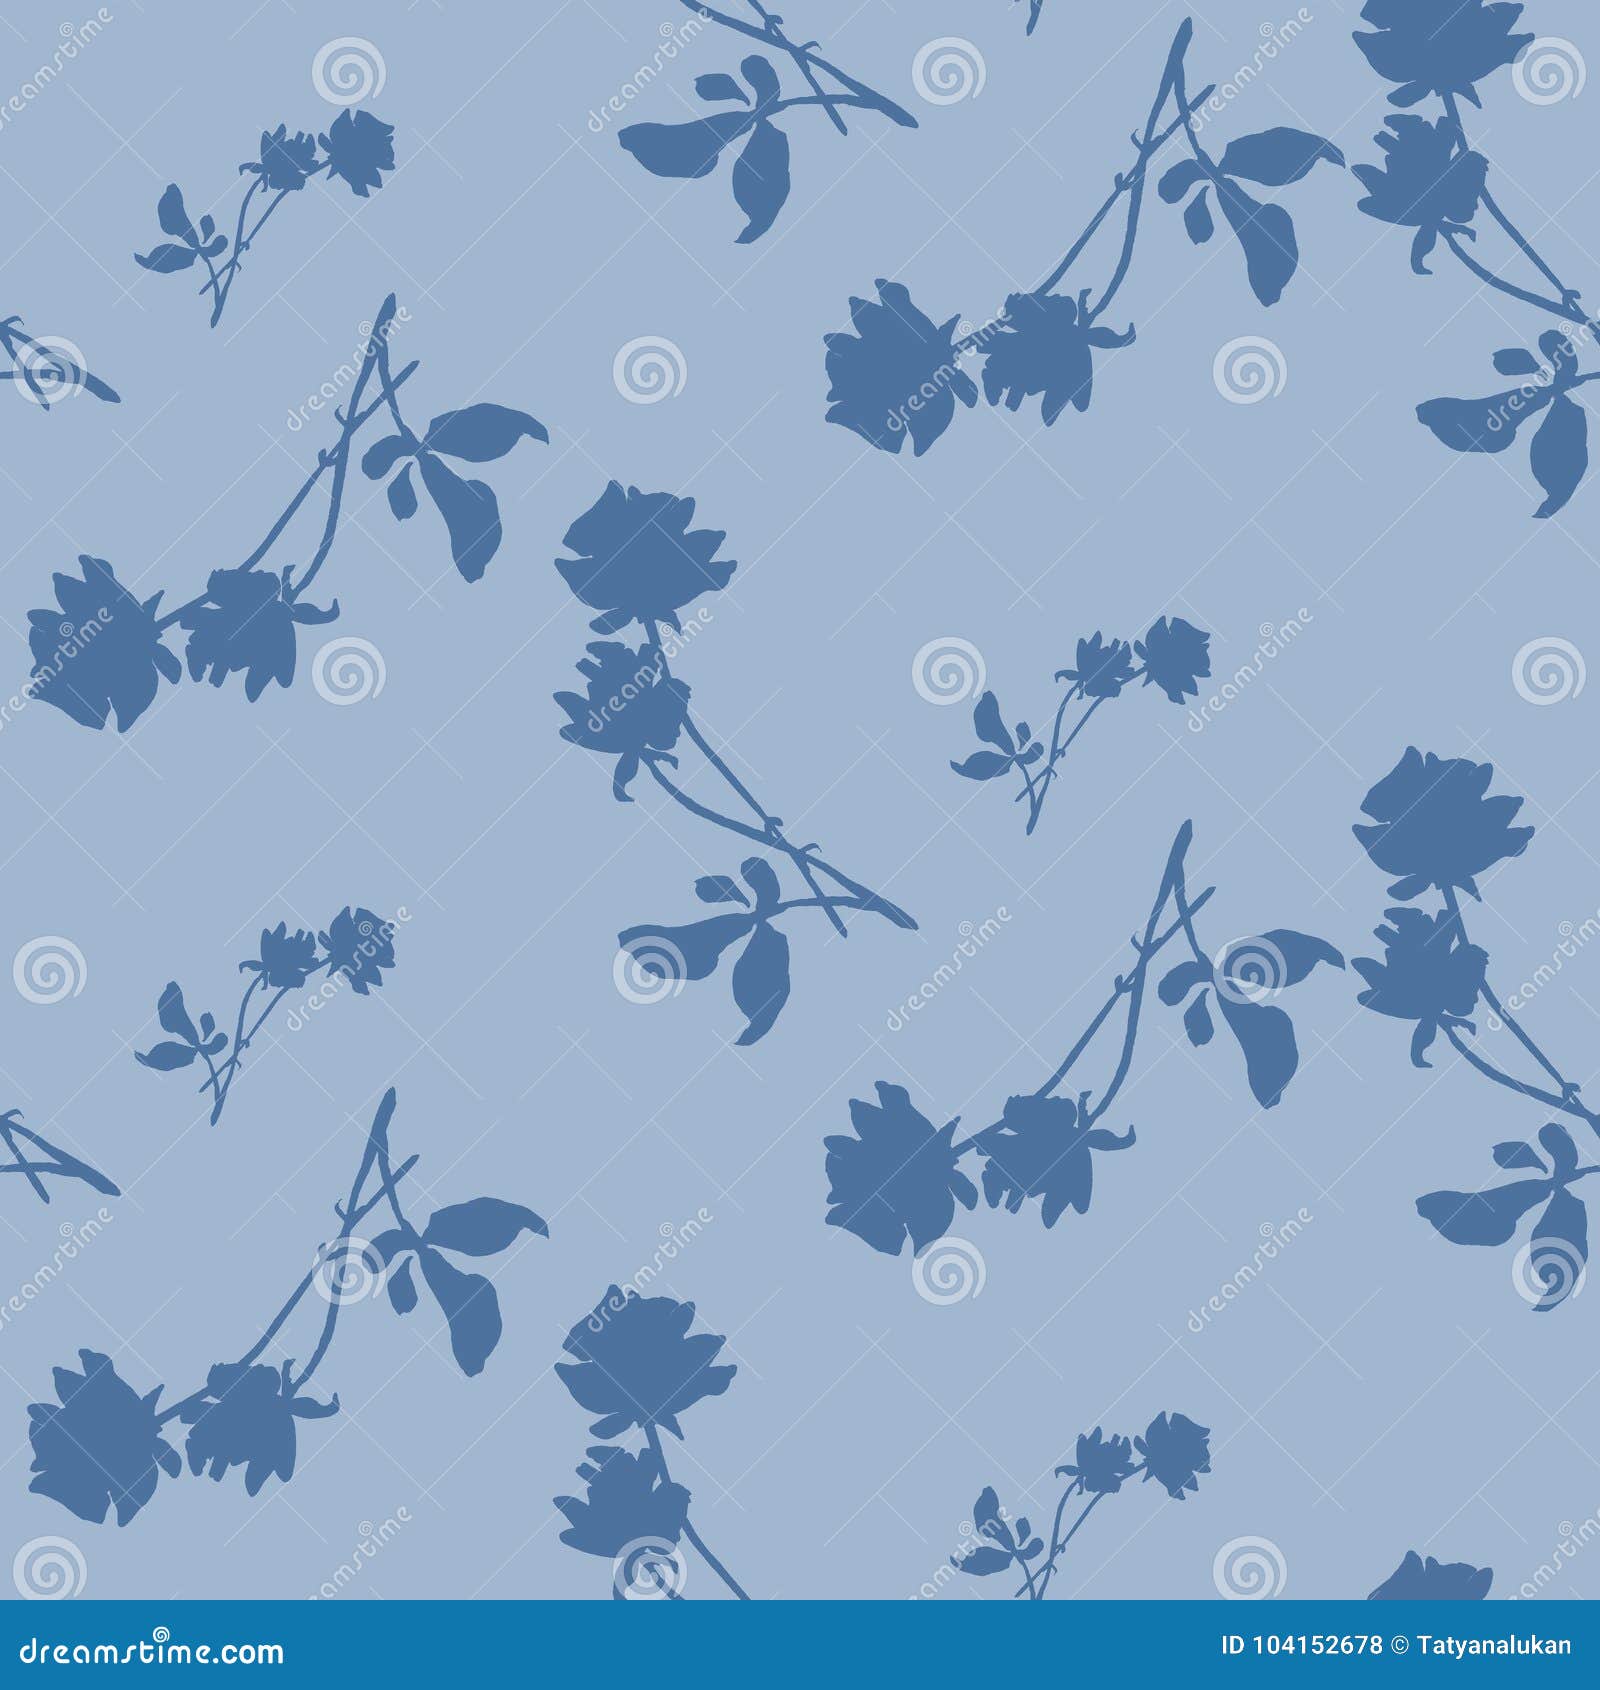 Watercolor Seamless Pattern With Blue Roses And Leaves On Light